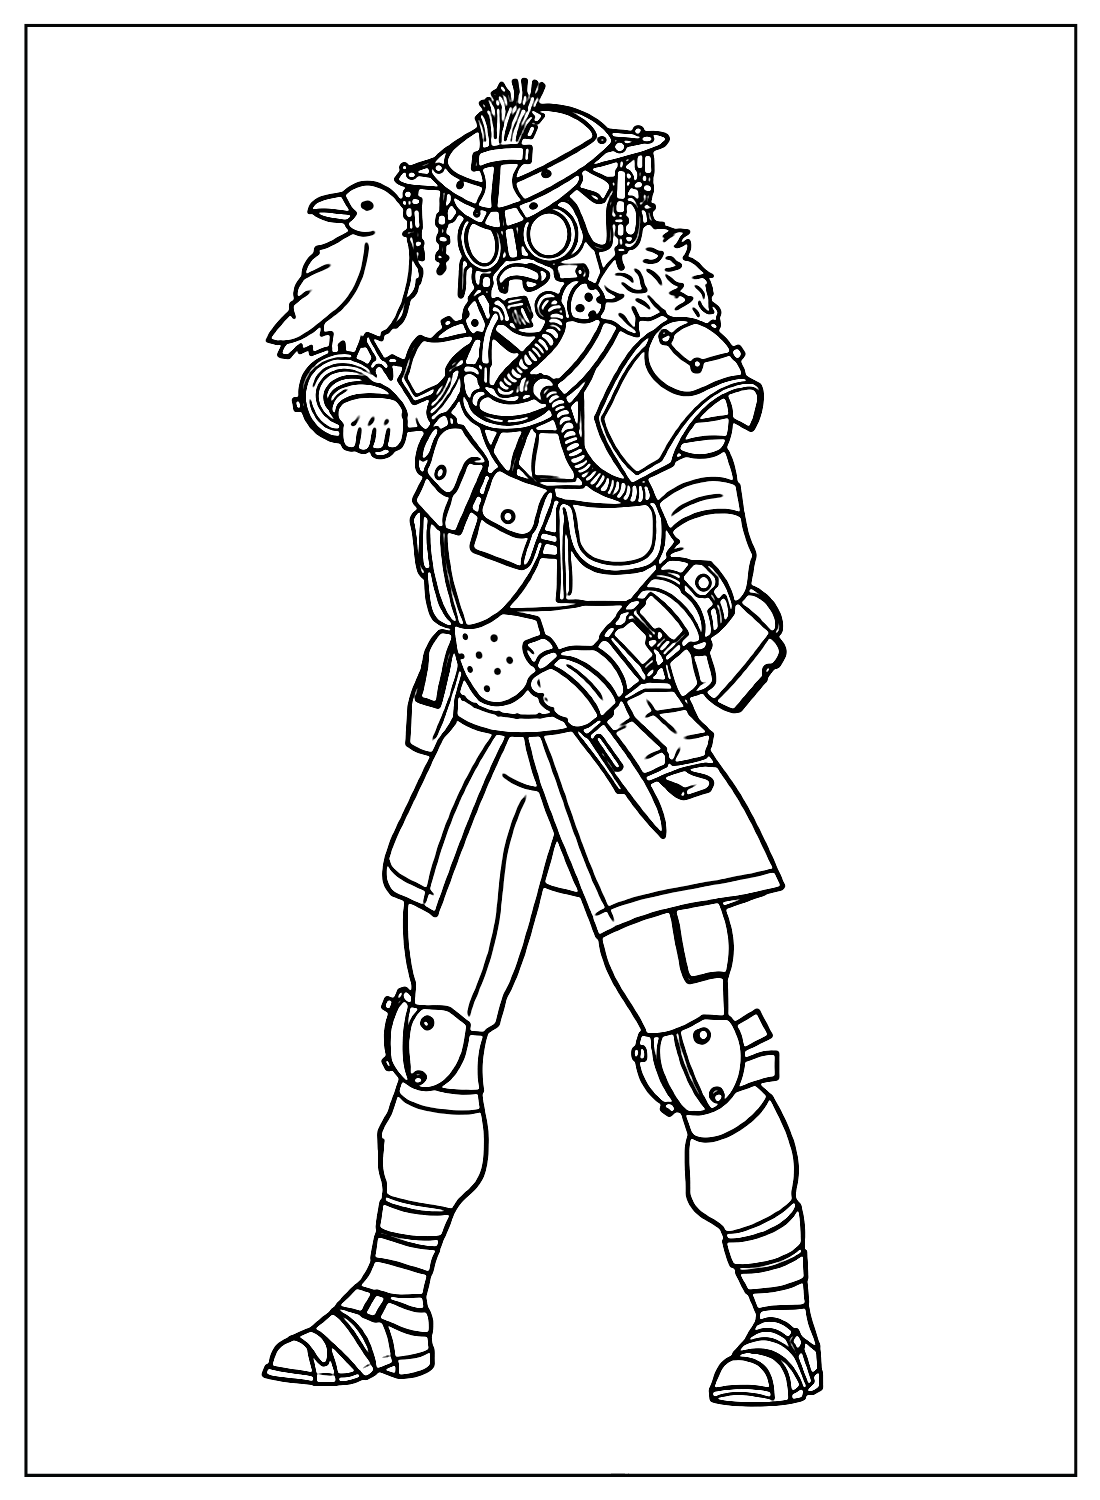 Coloring Page Apex Legends Bloodhound from Apex Legends